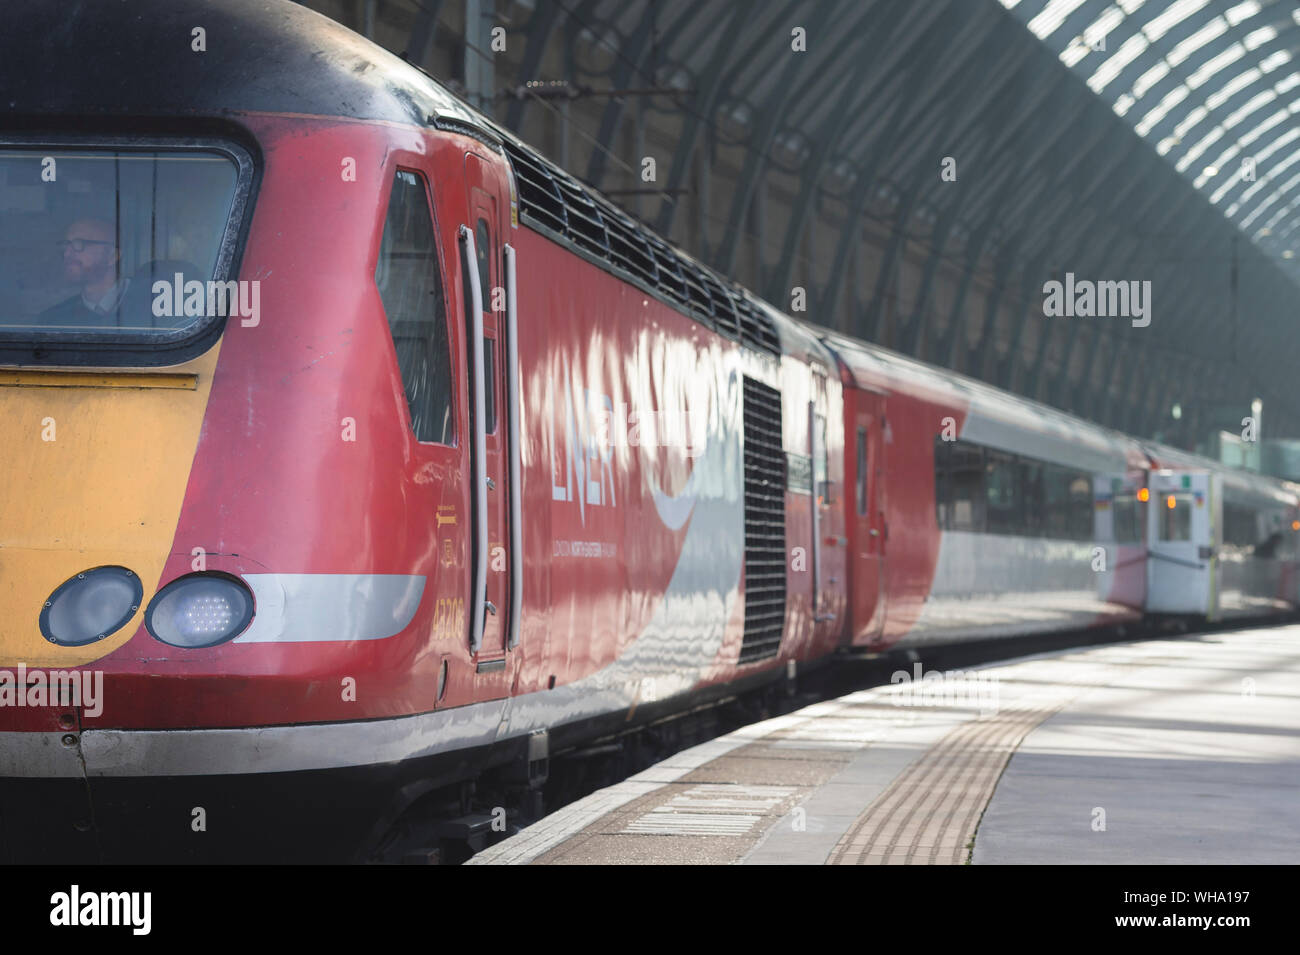 HIgh speed train in LNER livery waiting at King's Cross Railway Station, London, England. Stock Photo